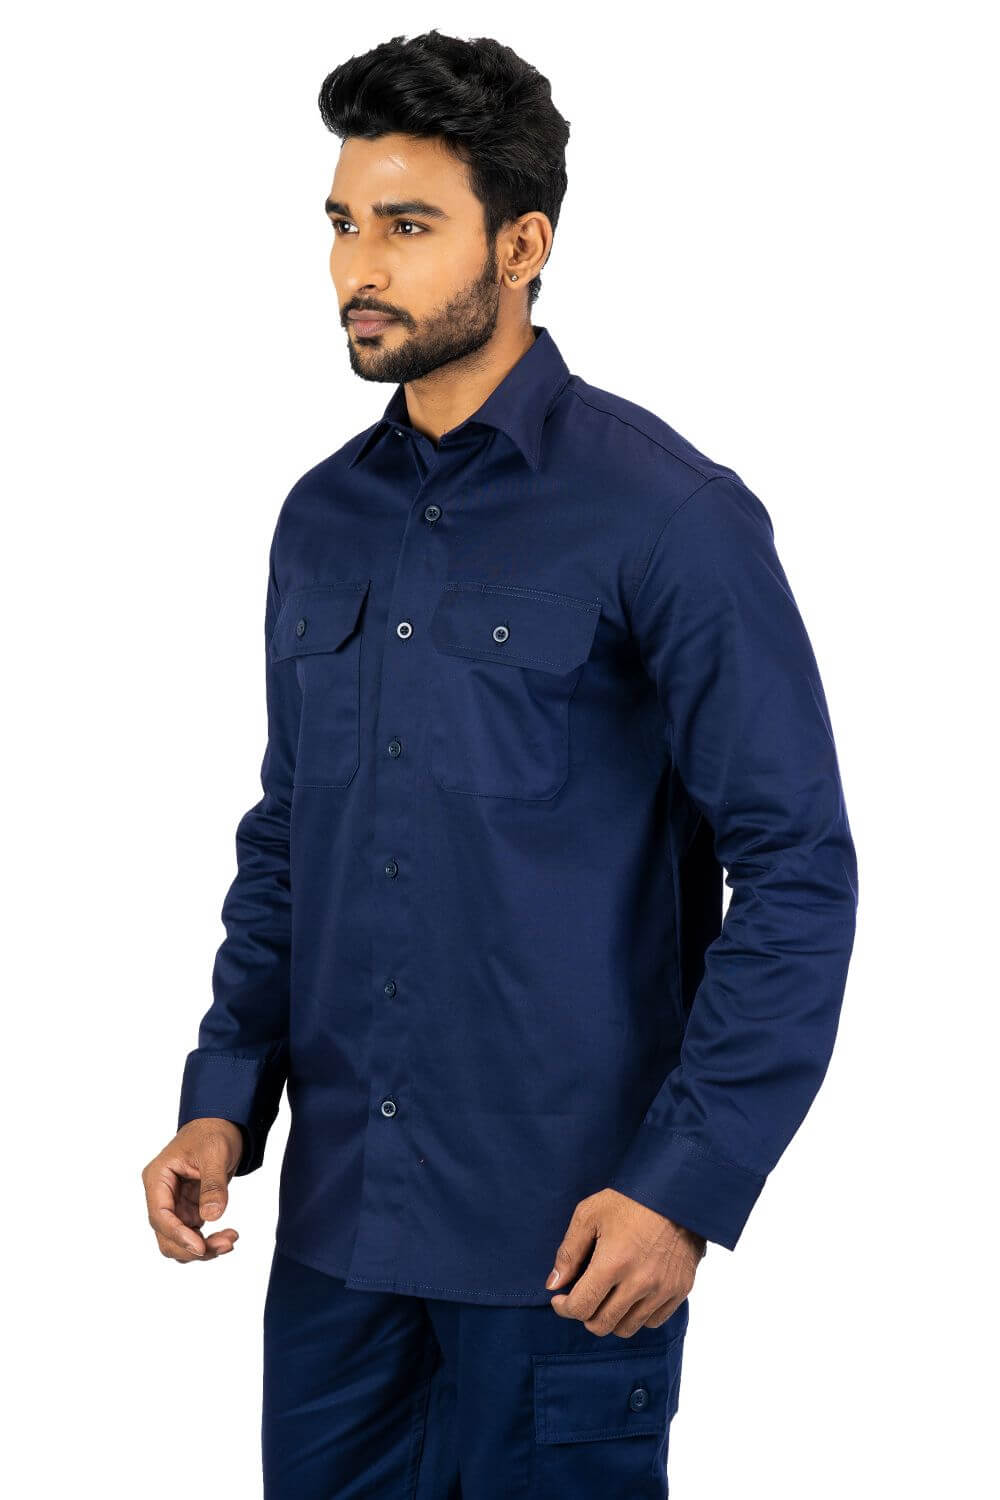 Industrial work shirt designed to provide optimum comfort and mobility during the strenuous hours at work.